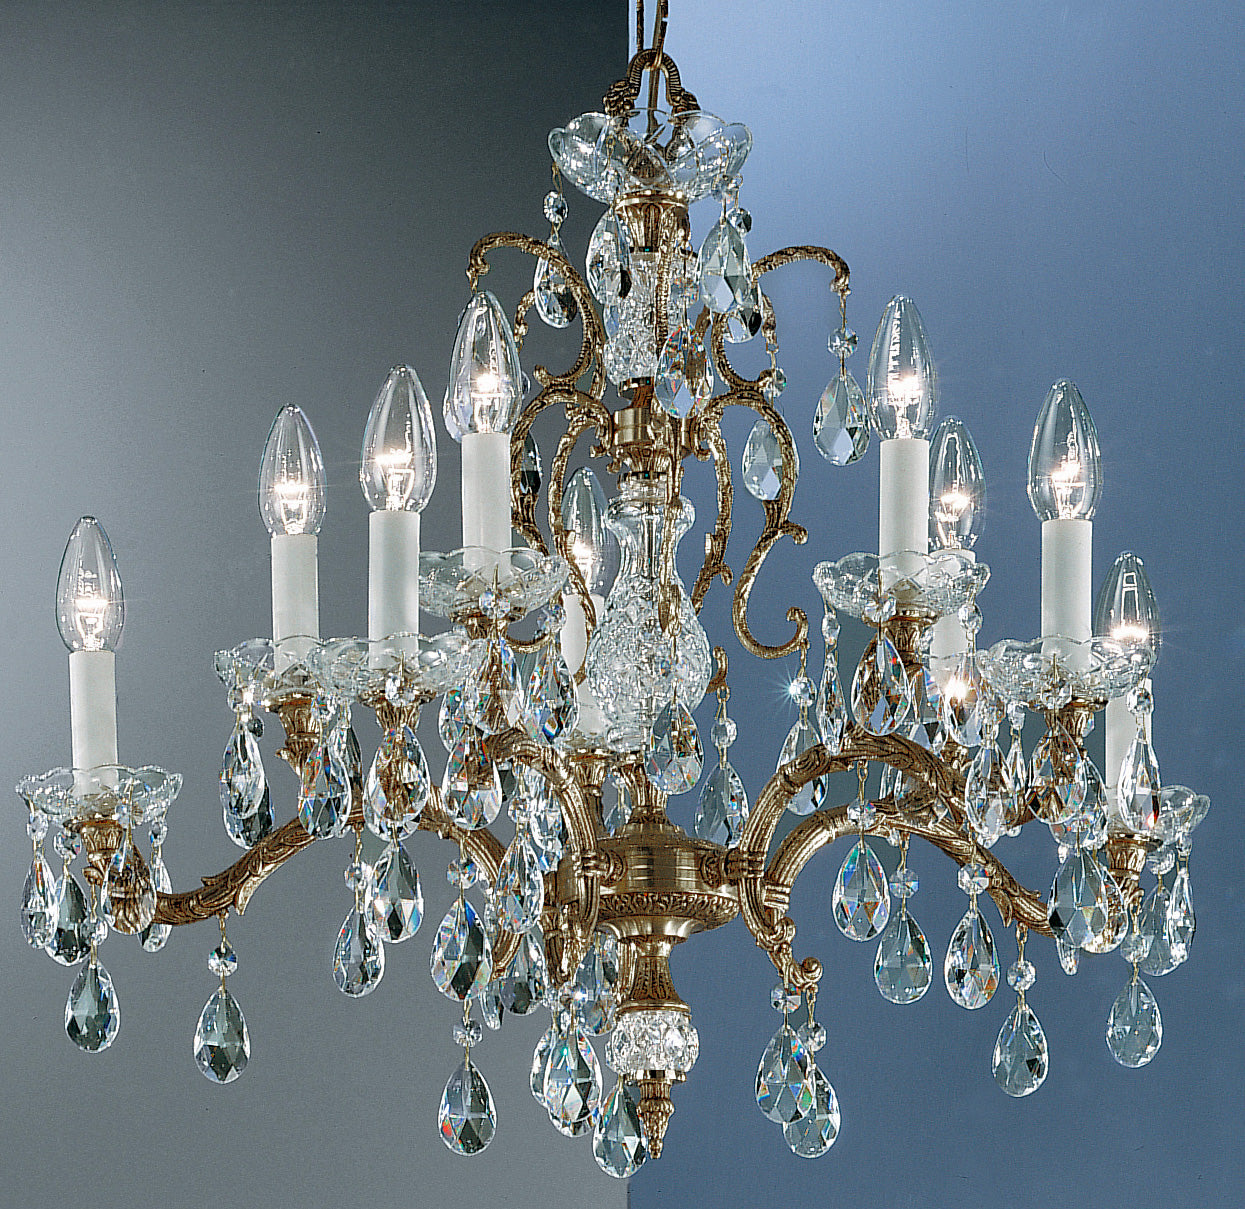 Classic Lighting 5530 RB PAM Madrid Crystal/Cast Brass Chandelier in Roman Bronze (Imported from Spain)